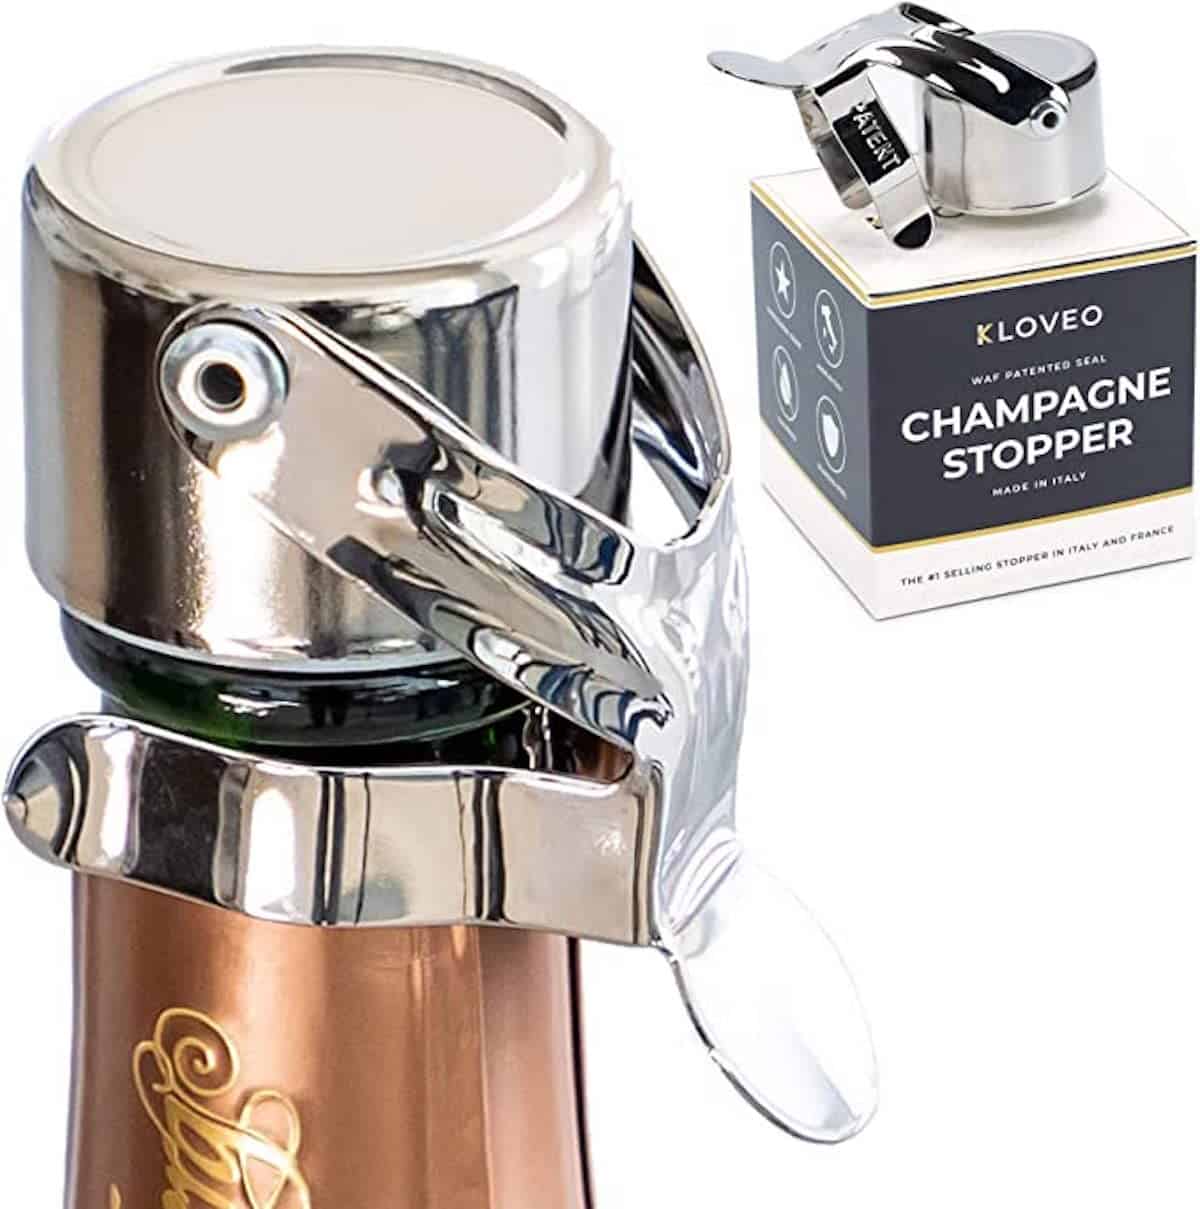 Italian Gifts: Kloveo Professional Sparkling Wine Stopper